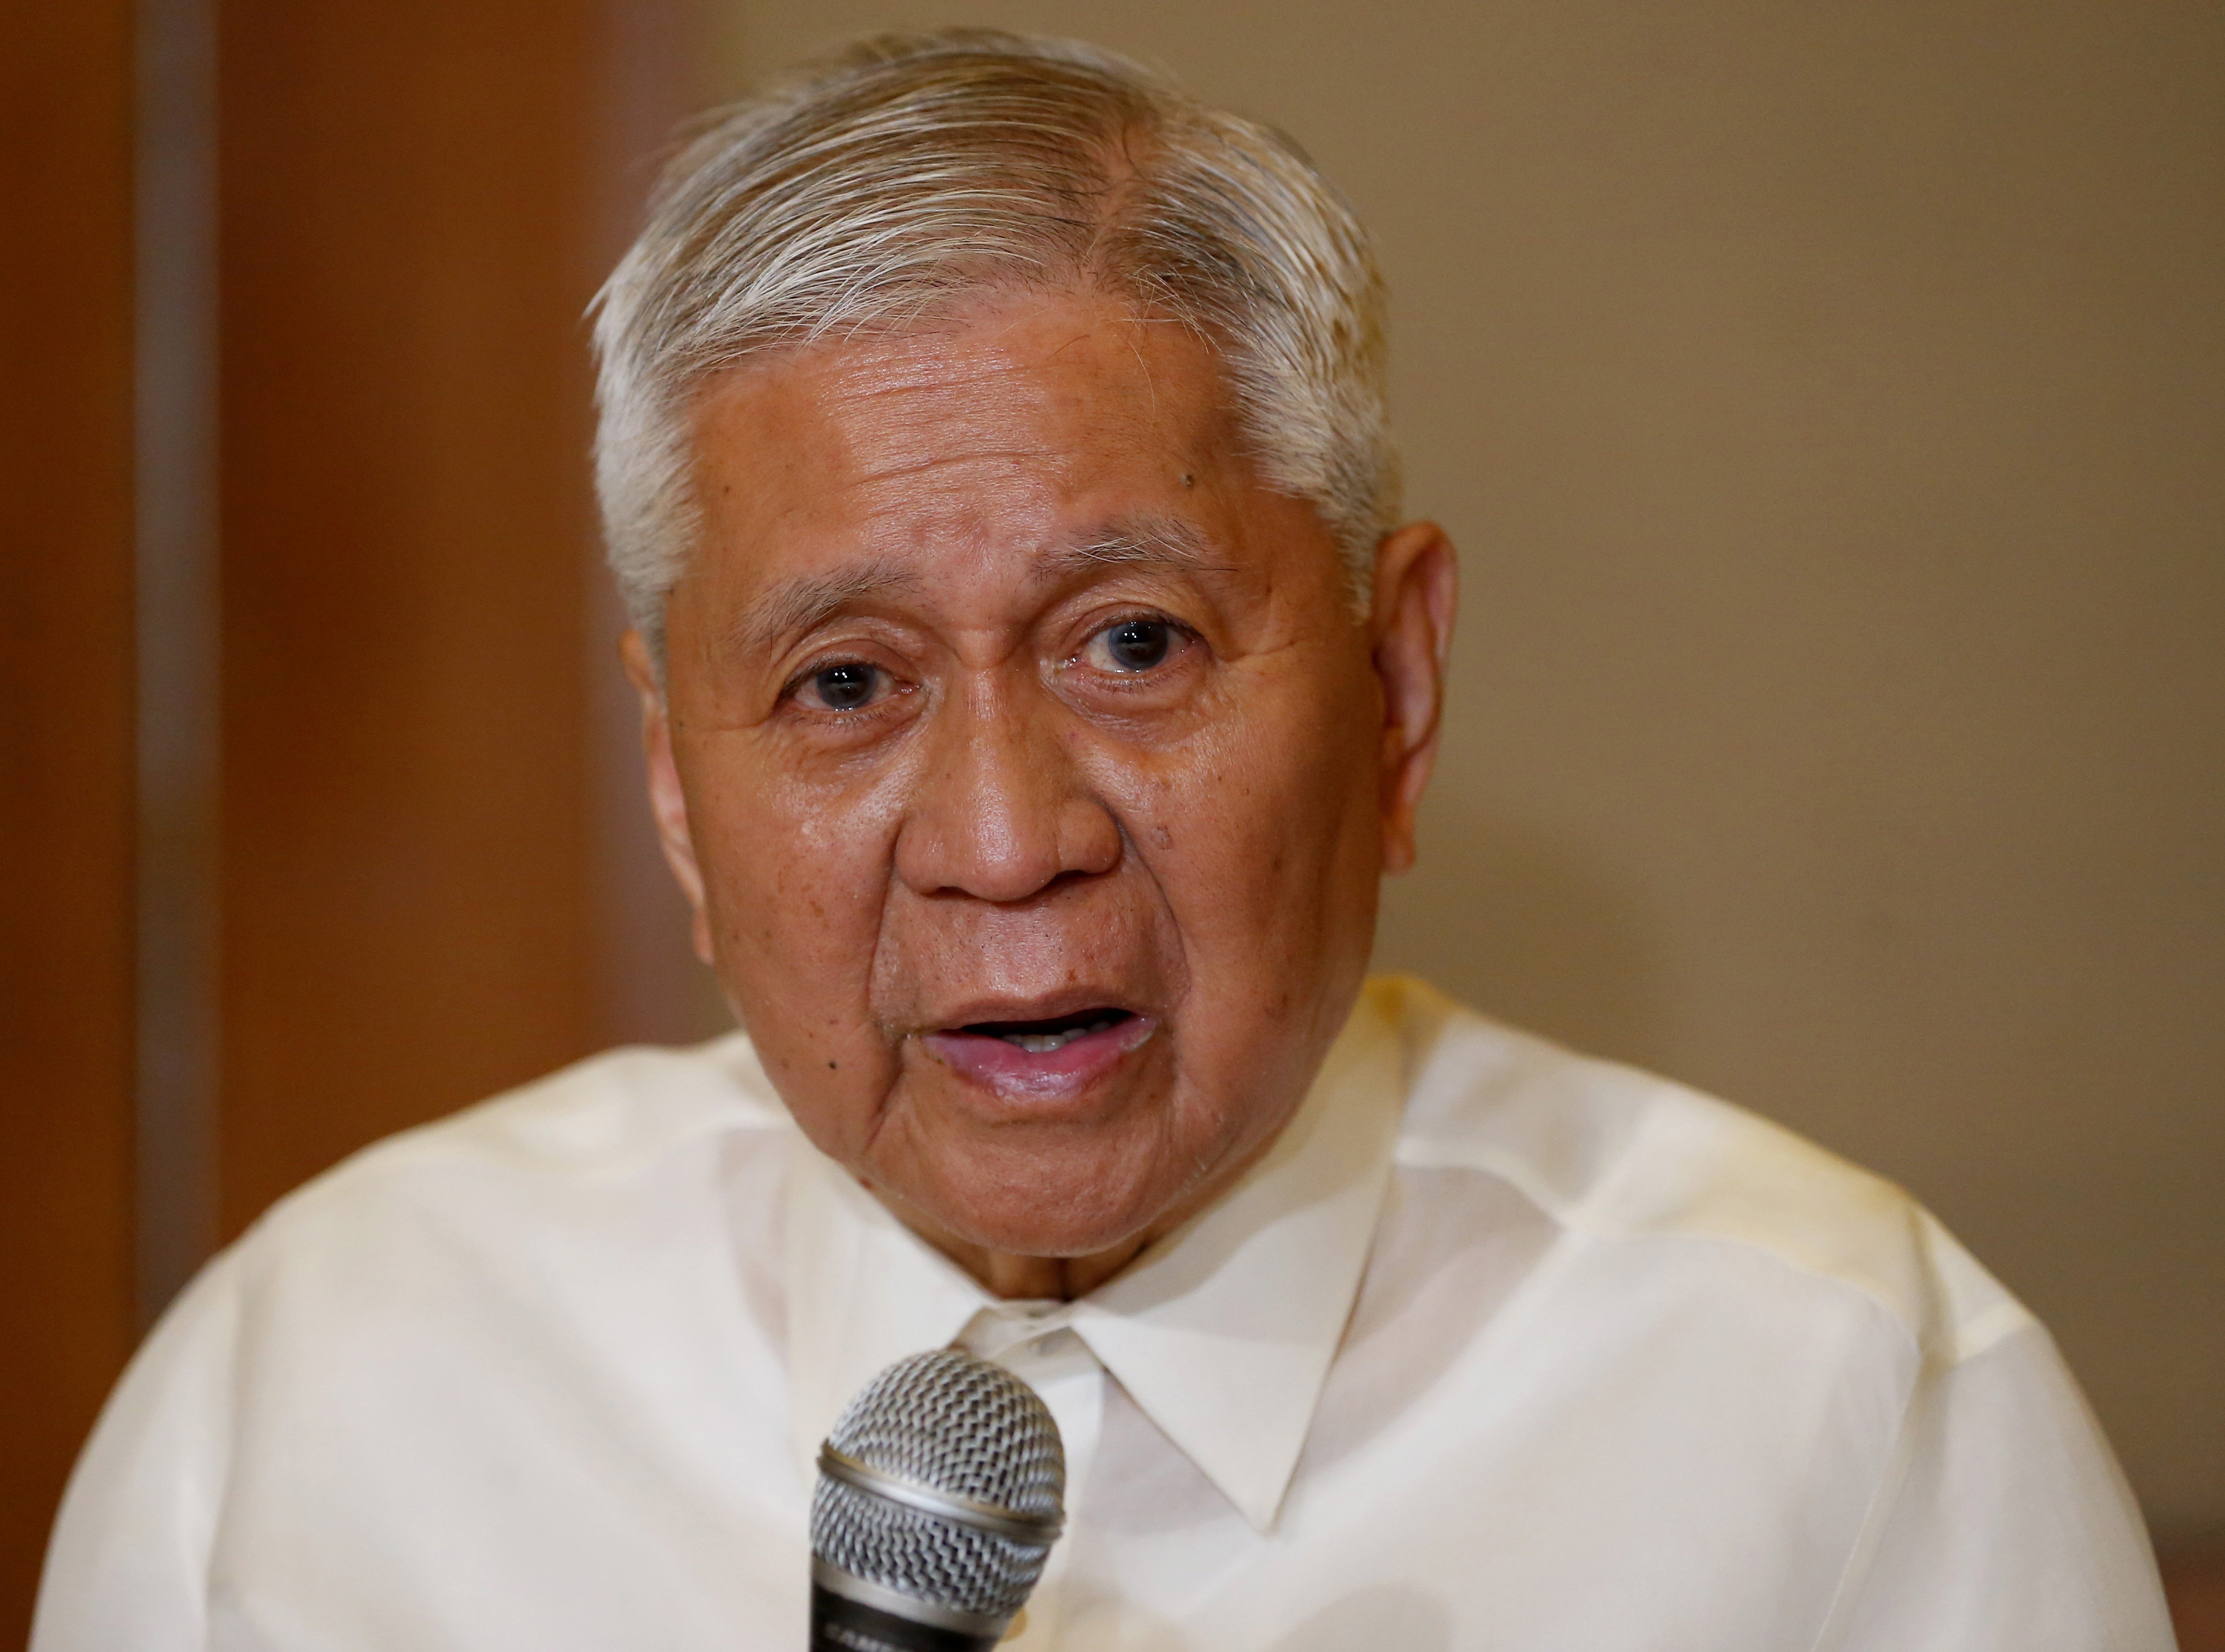 Frosty reception: the former foreign secretary of the Philippines Albert del Rosario arrived in Hong Kong on Friday. Photo: AP